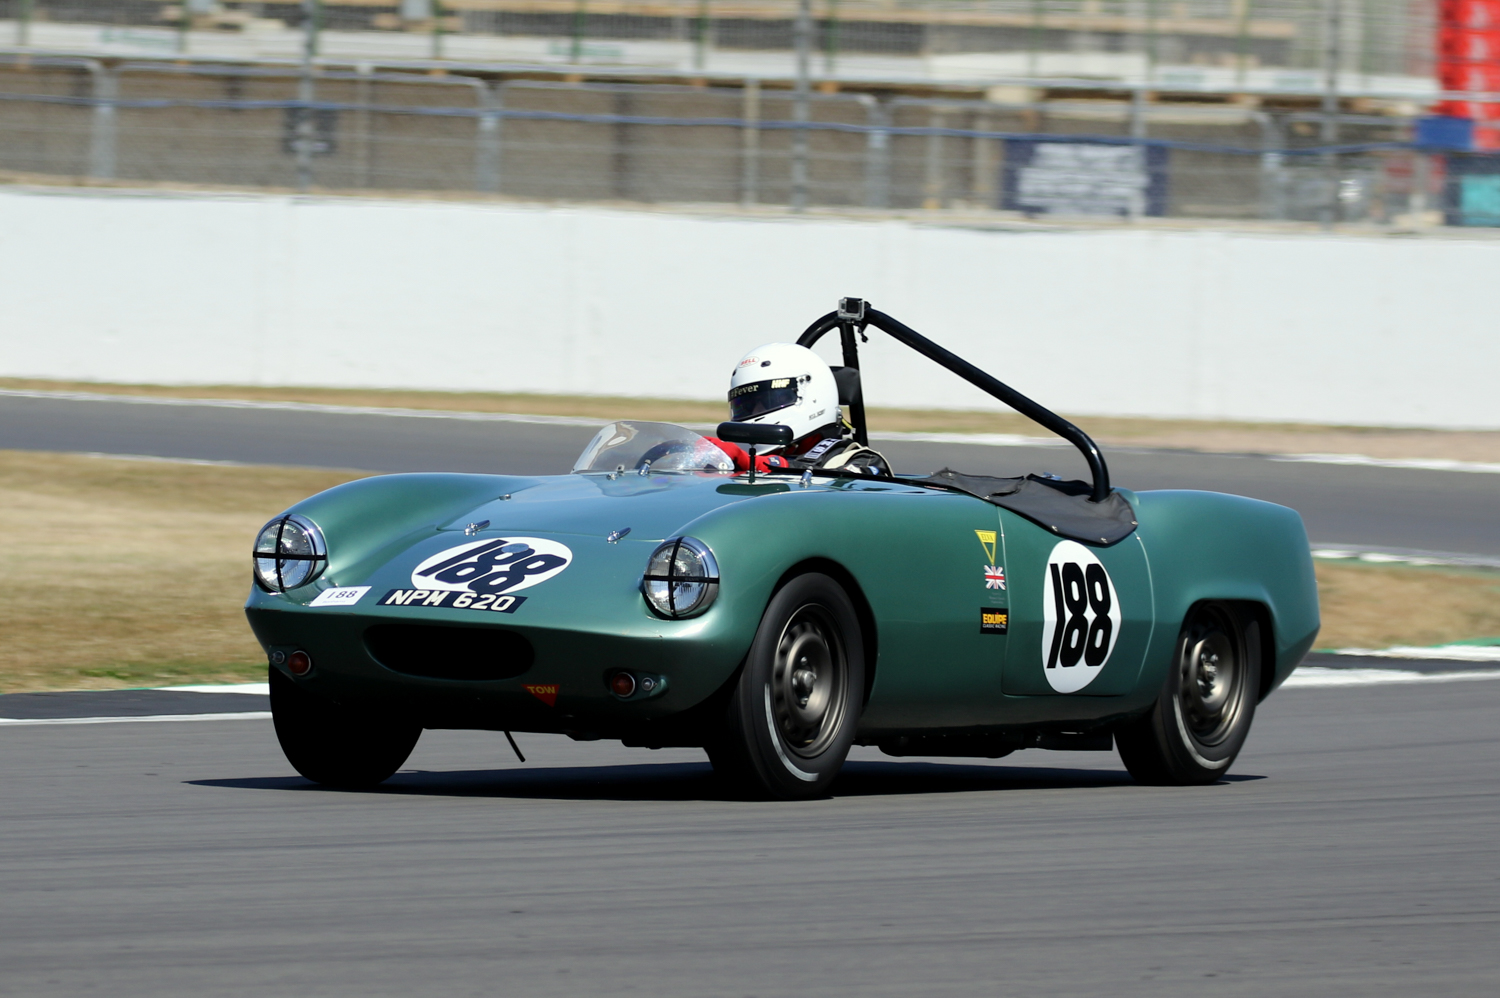 PAUL WOOLMER'S ELVA COURIER CAME HOME A FINE 4th in the 1950s SPORTS CAR RACE. Picasa